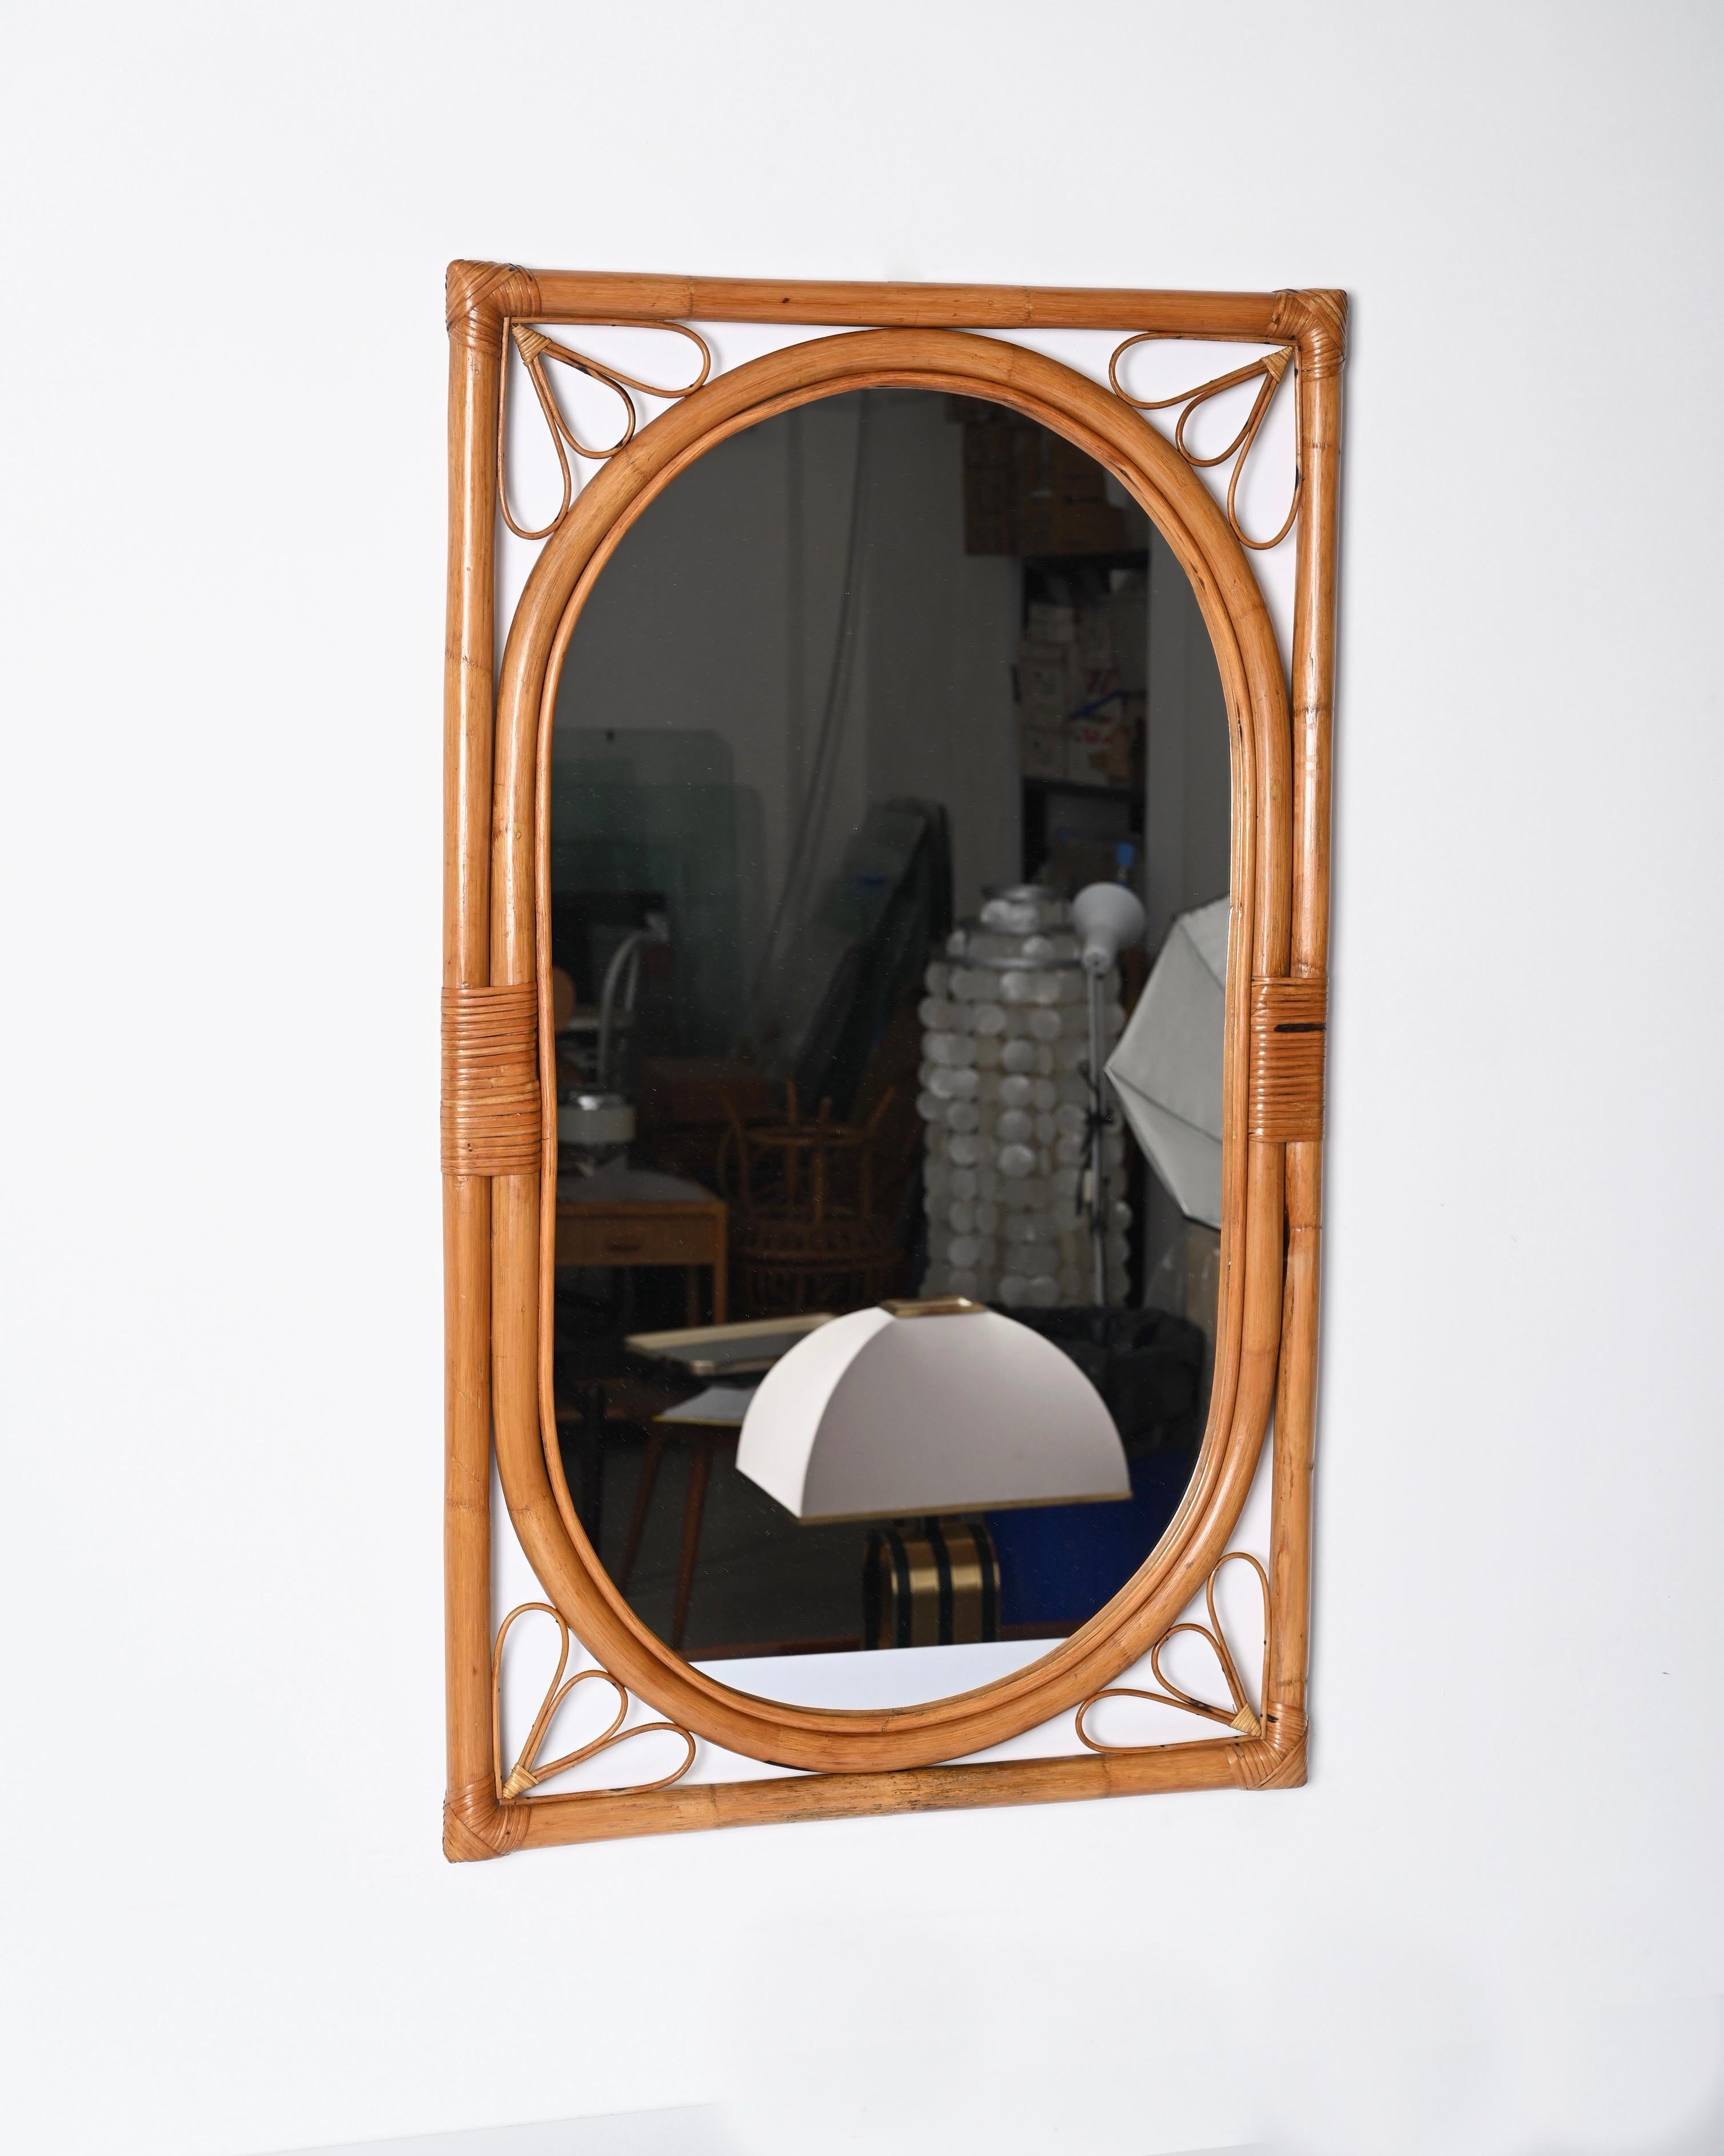 Marvellous midcentury mirror with double bamboo frame and rattan decorations. This fantastic item was produced in Italy in the 1970s.

This gorgeous mirror features an external rectangular bamboo frame and an internal oval frame that holds the